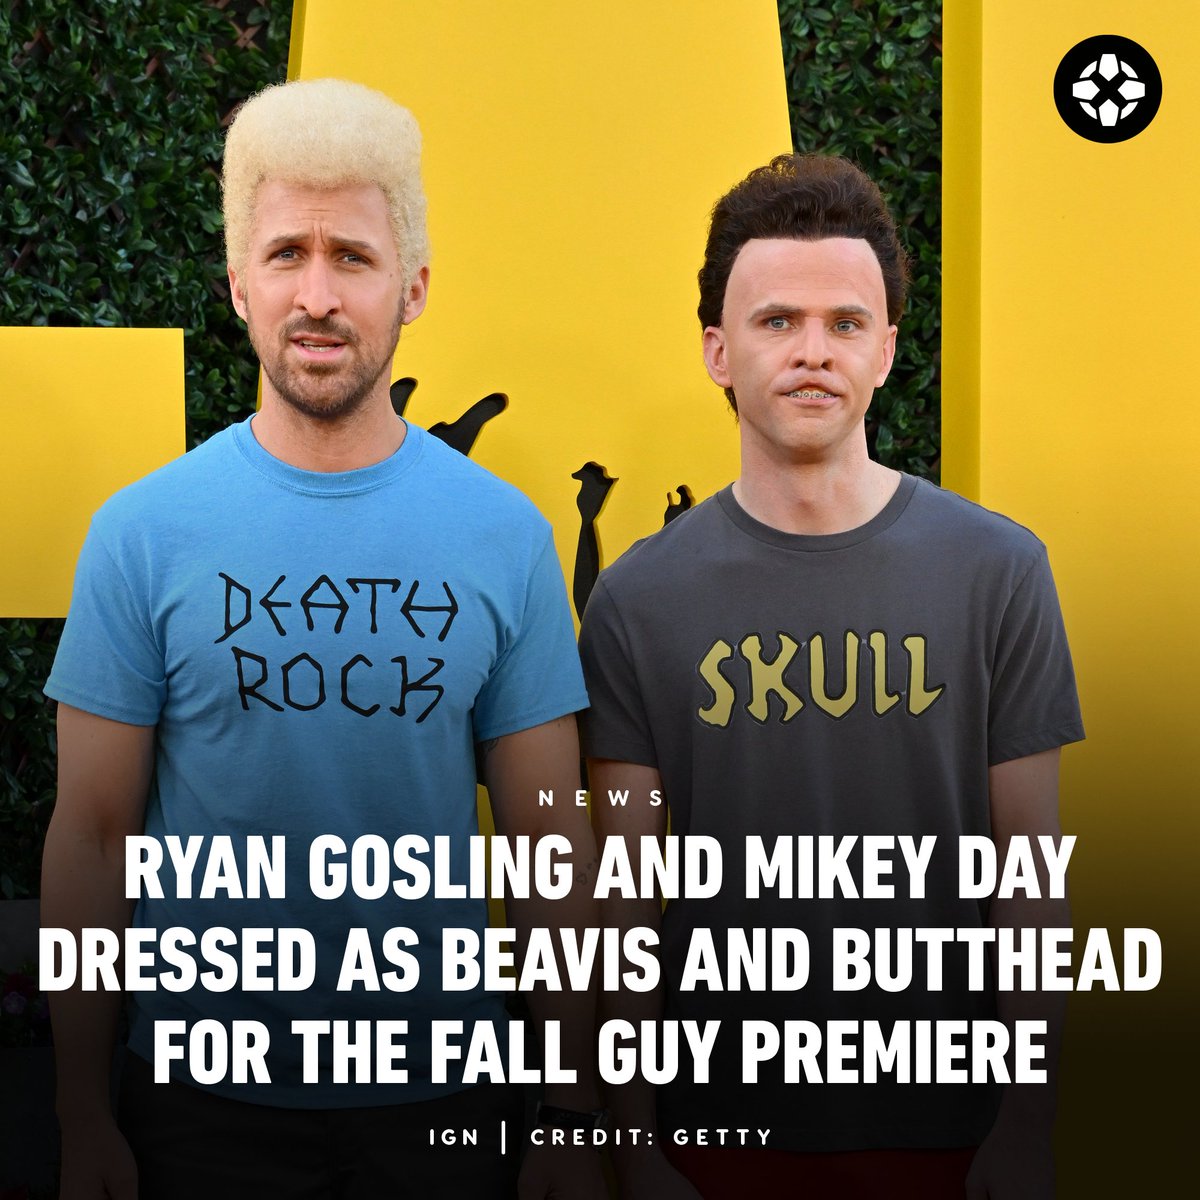 Reprising their roles from SNL as guys who look unintentionally similar to Beavis and Butthead, Ryan Gosling and Mikey Day attended the premiere for The Fall Guy.